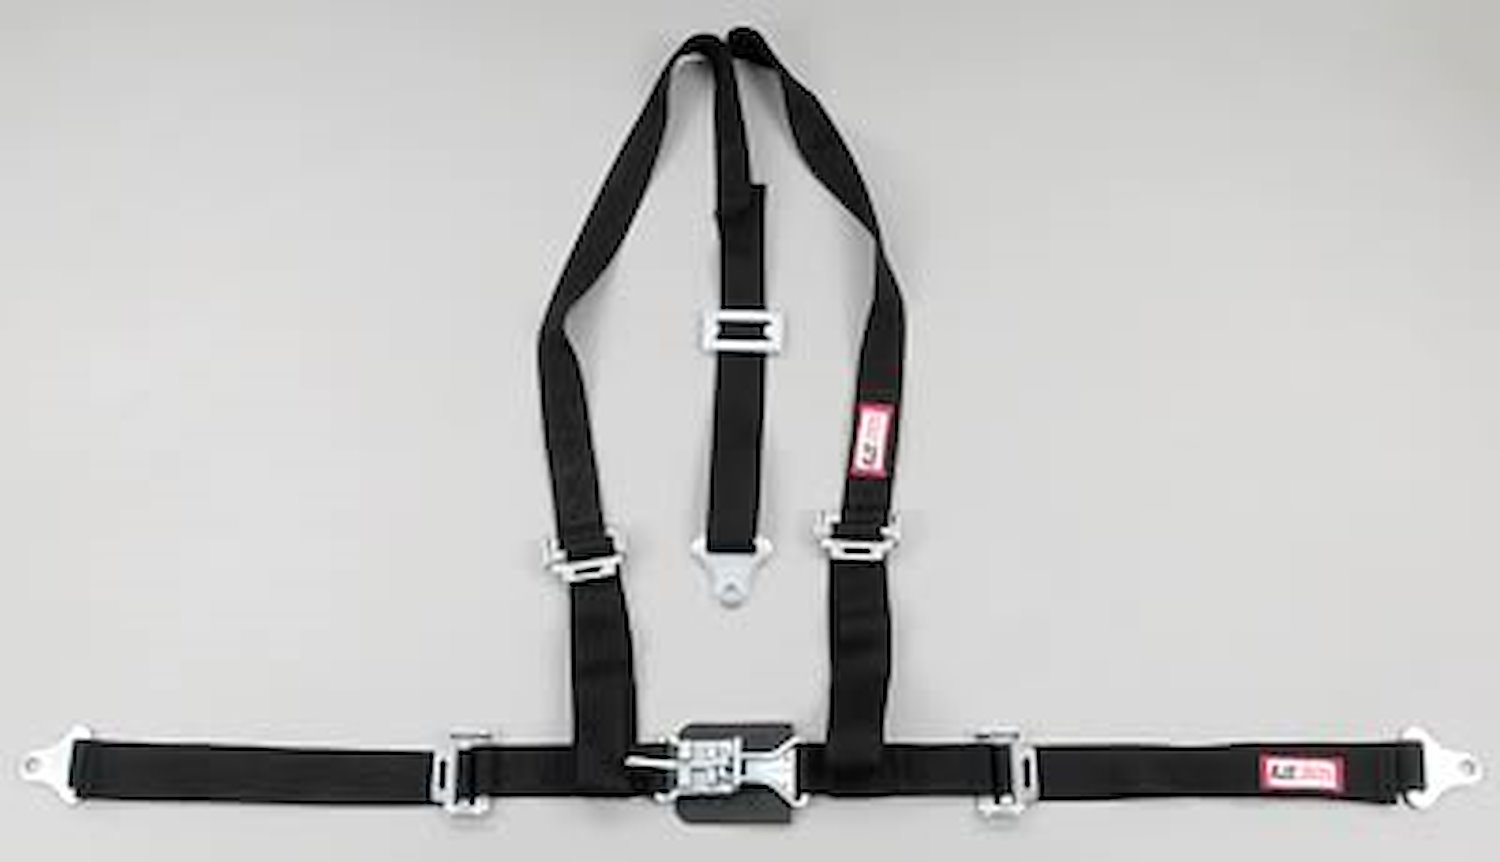 NON-SFI L&L HARNESS 3 PULL UP Lap Belt SEWN IN 2 Shoulder Harness V ROLL BAR Mount ALL SNAP ENDS GRAY